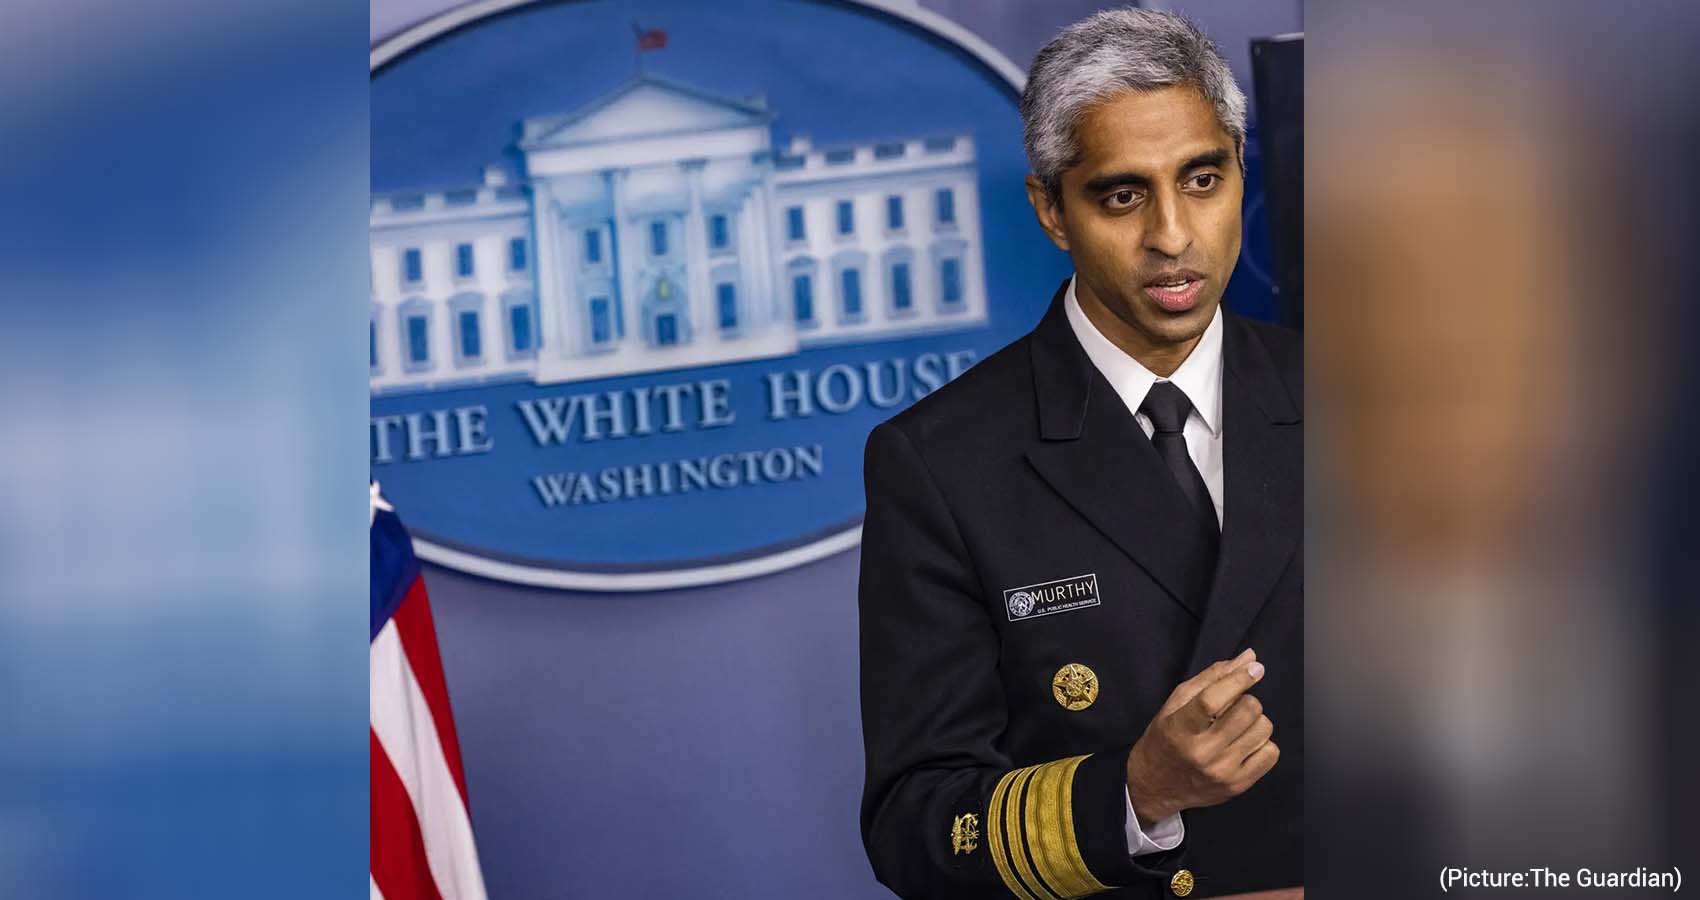 U.S. Surgeon General Investigates Covid-19 Misinformation Dr. Vivek Murthy Says It’s ‘About Protecting The Nation’s Health’